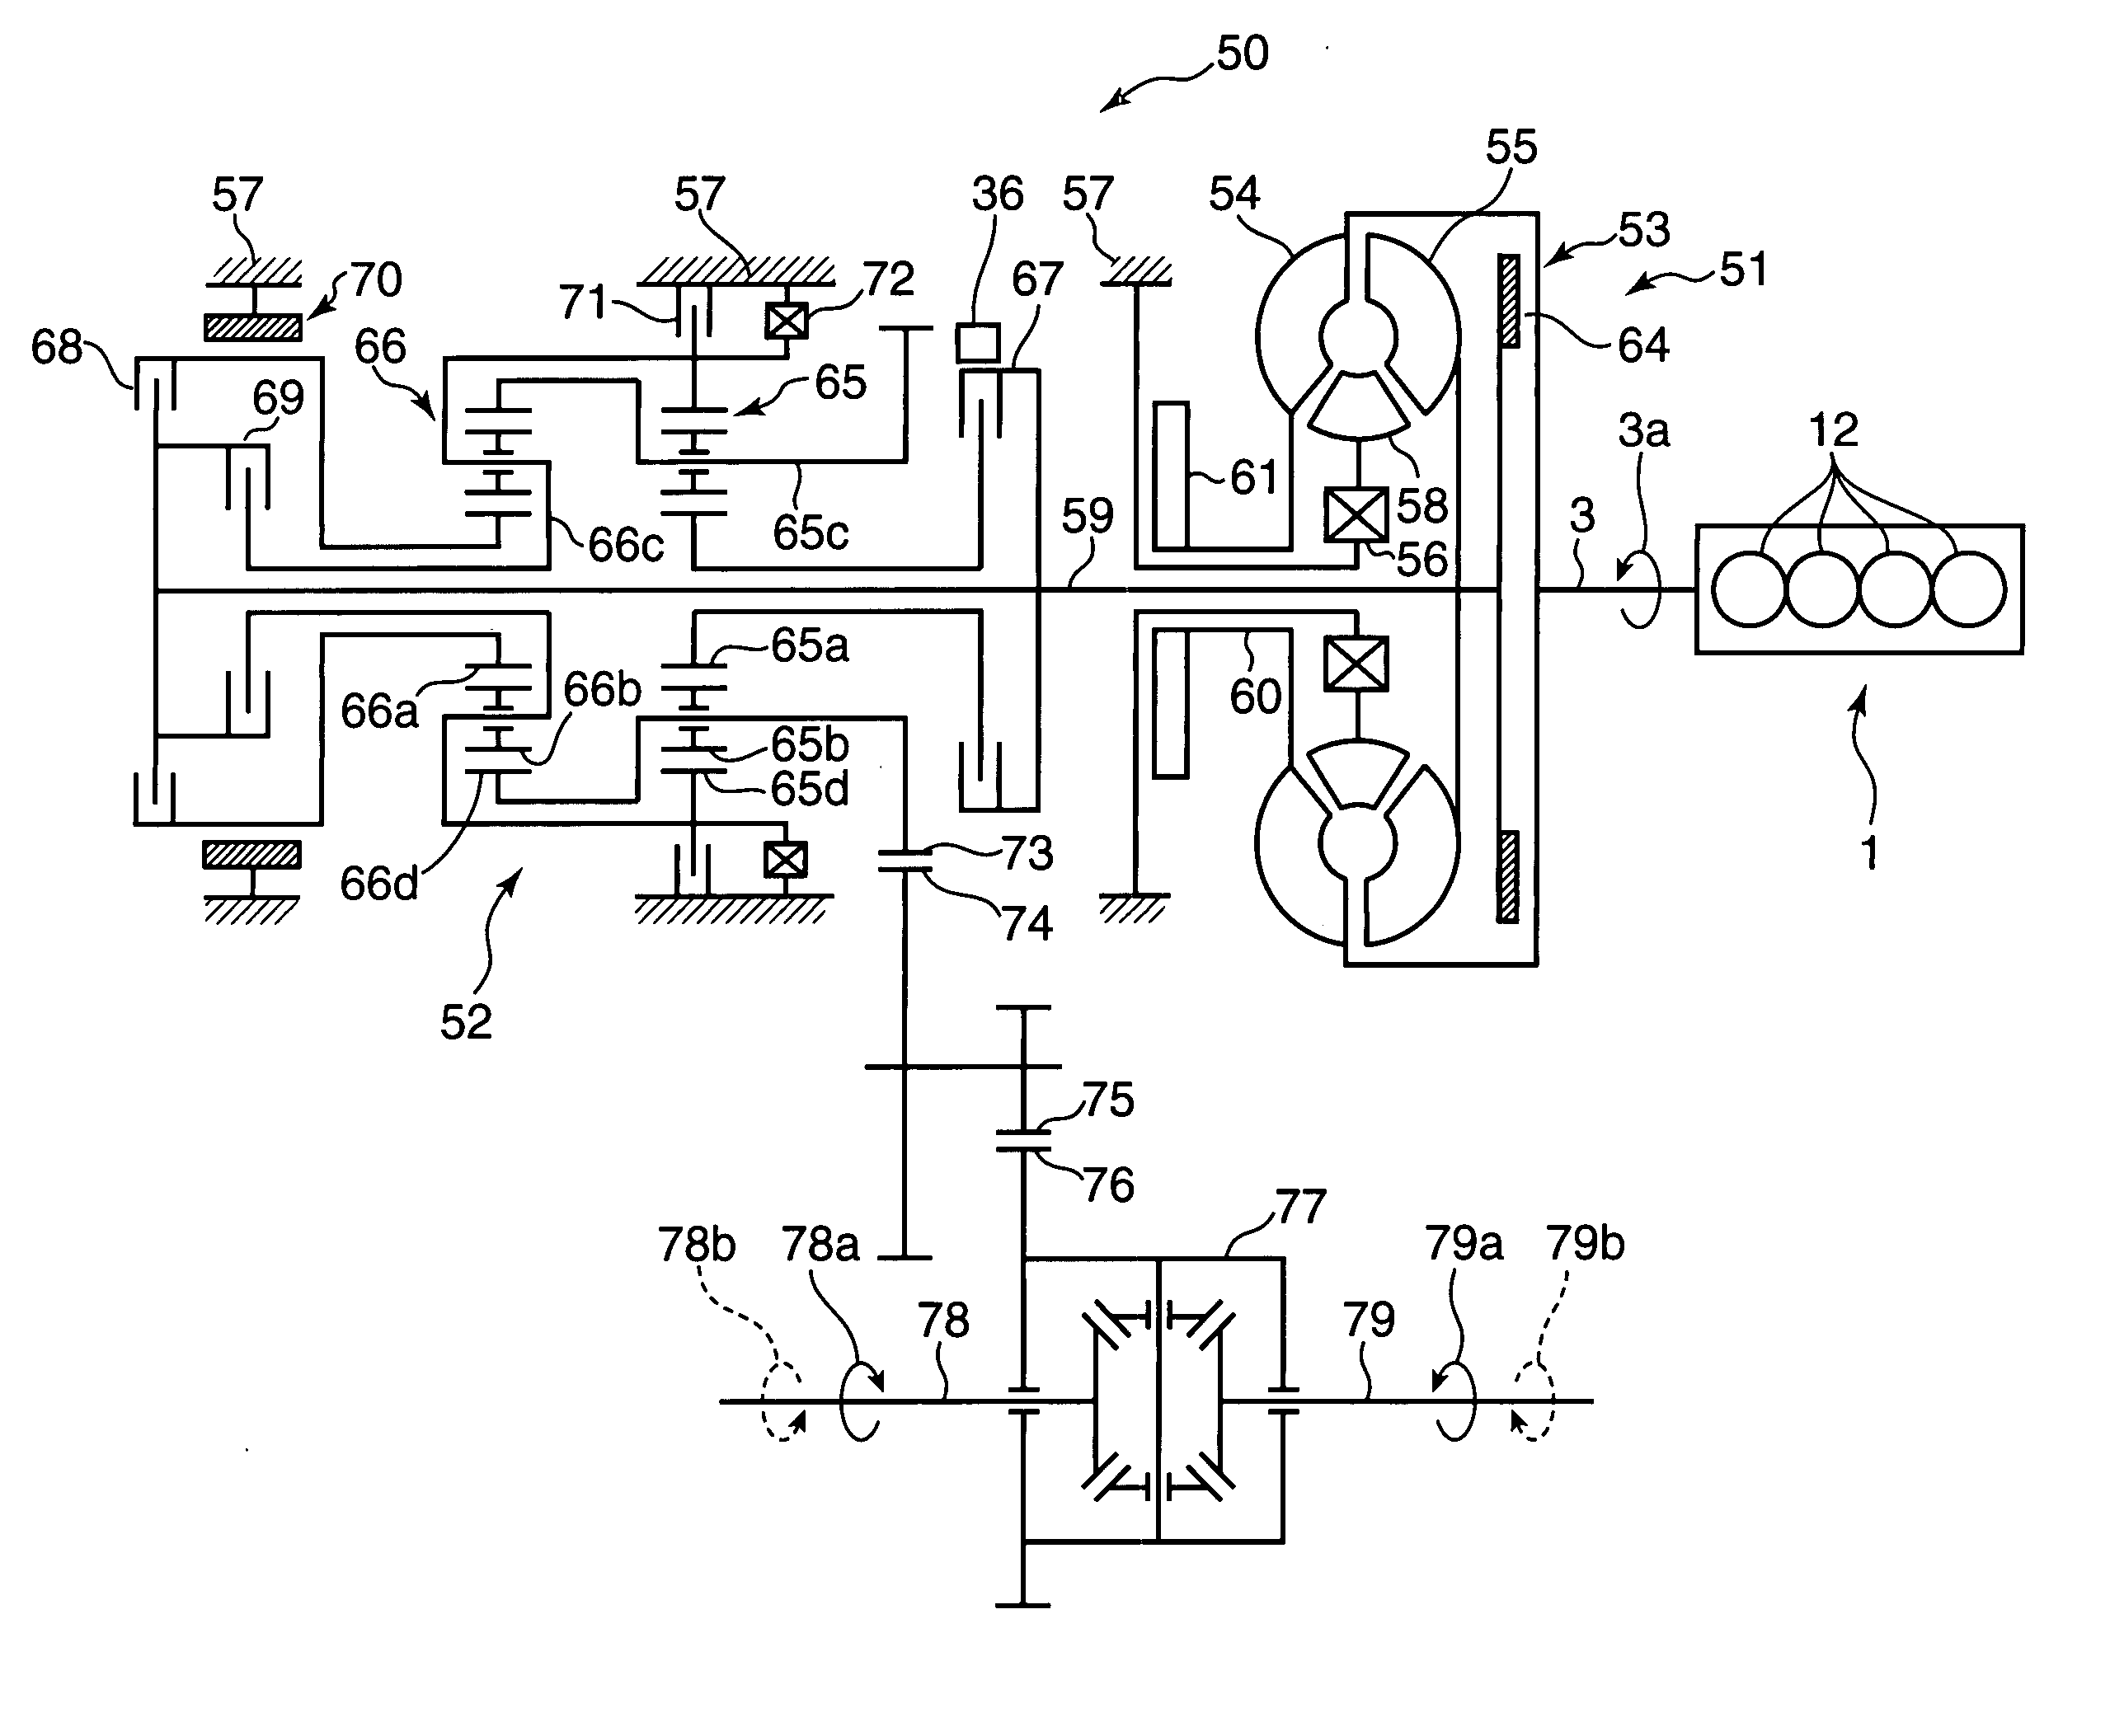 Engine starting system for power train